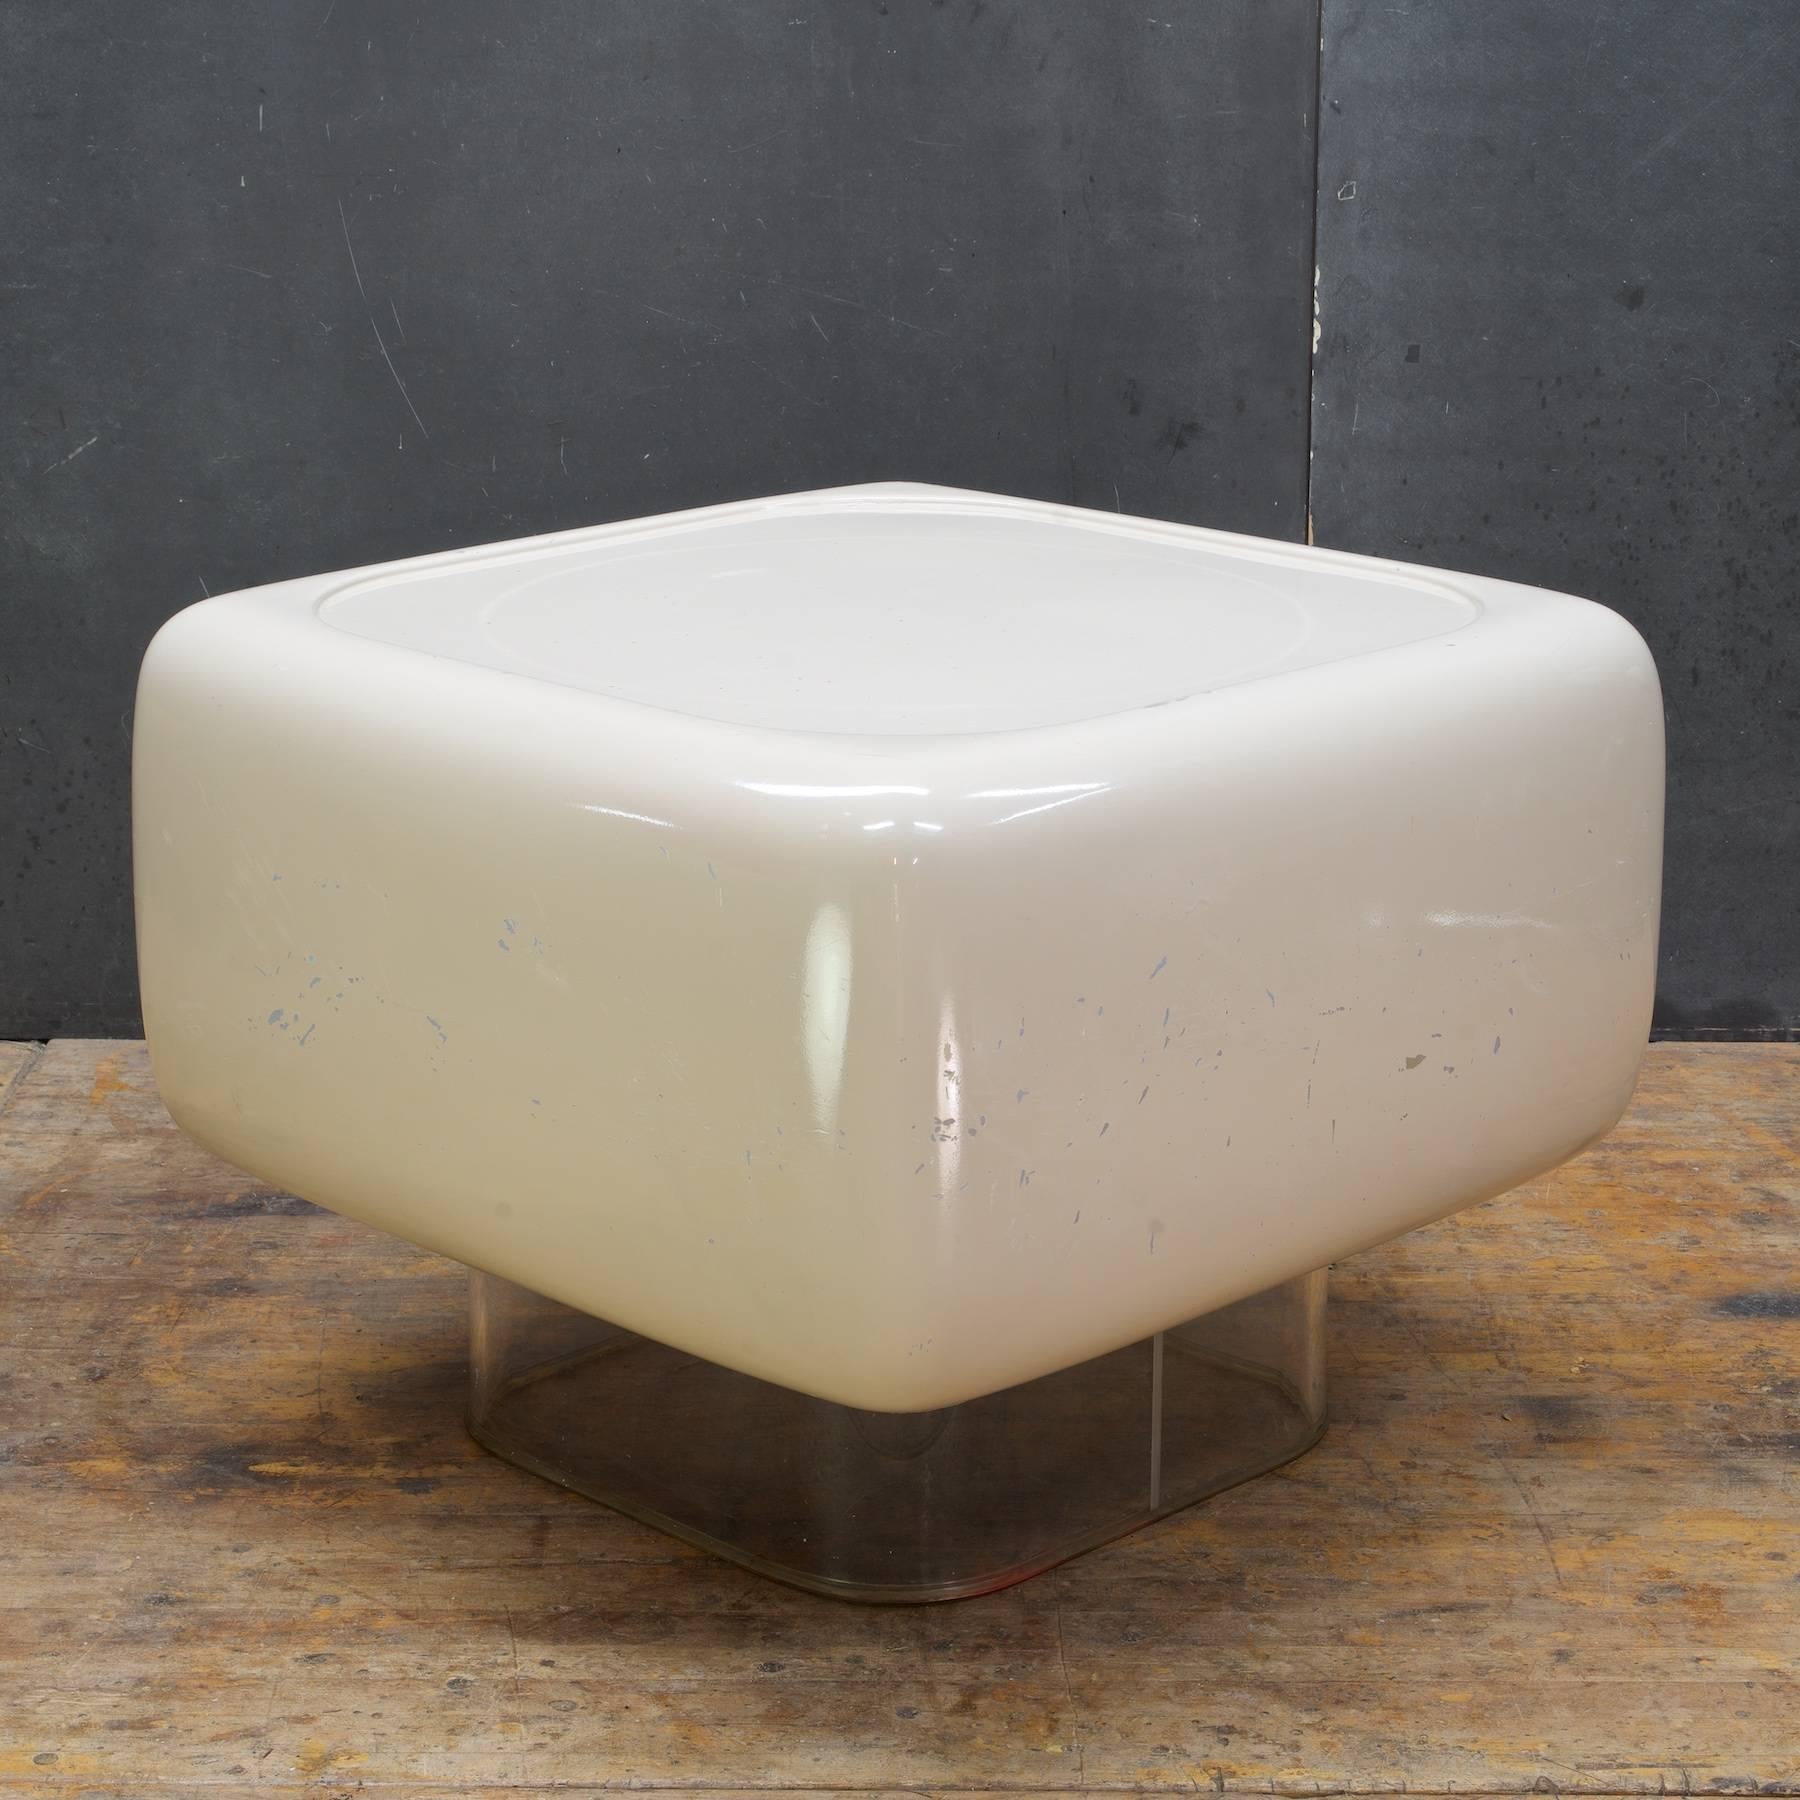 Uncommon beauty in this Post Modern design on transparent pedestal. 

We are offering this item in as-found condition with patina/chipping and scuffing to original off-white enamel surface. This levitating cocktail table could be painted to fit your